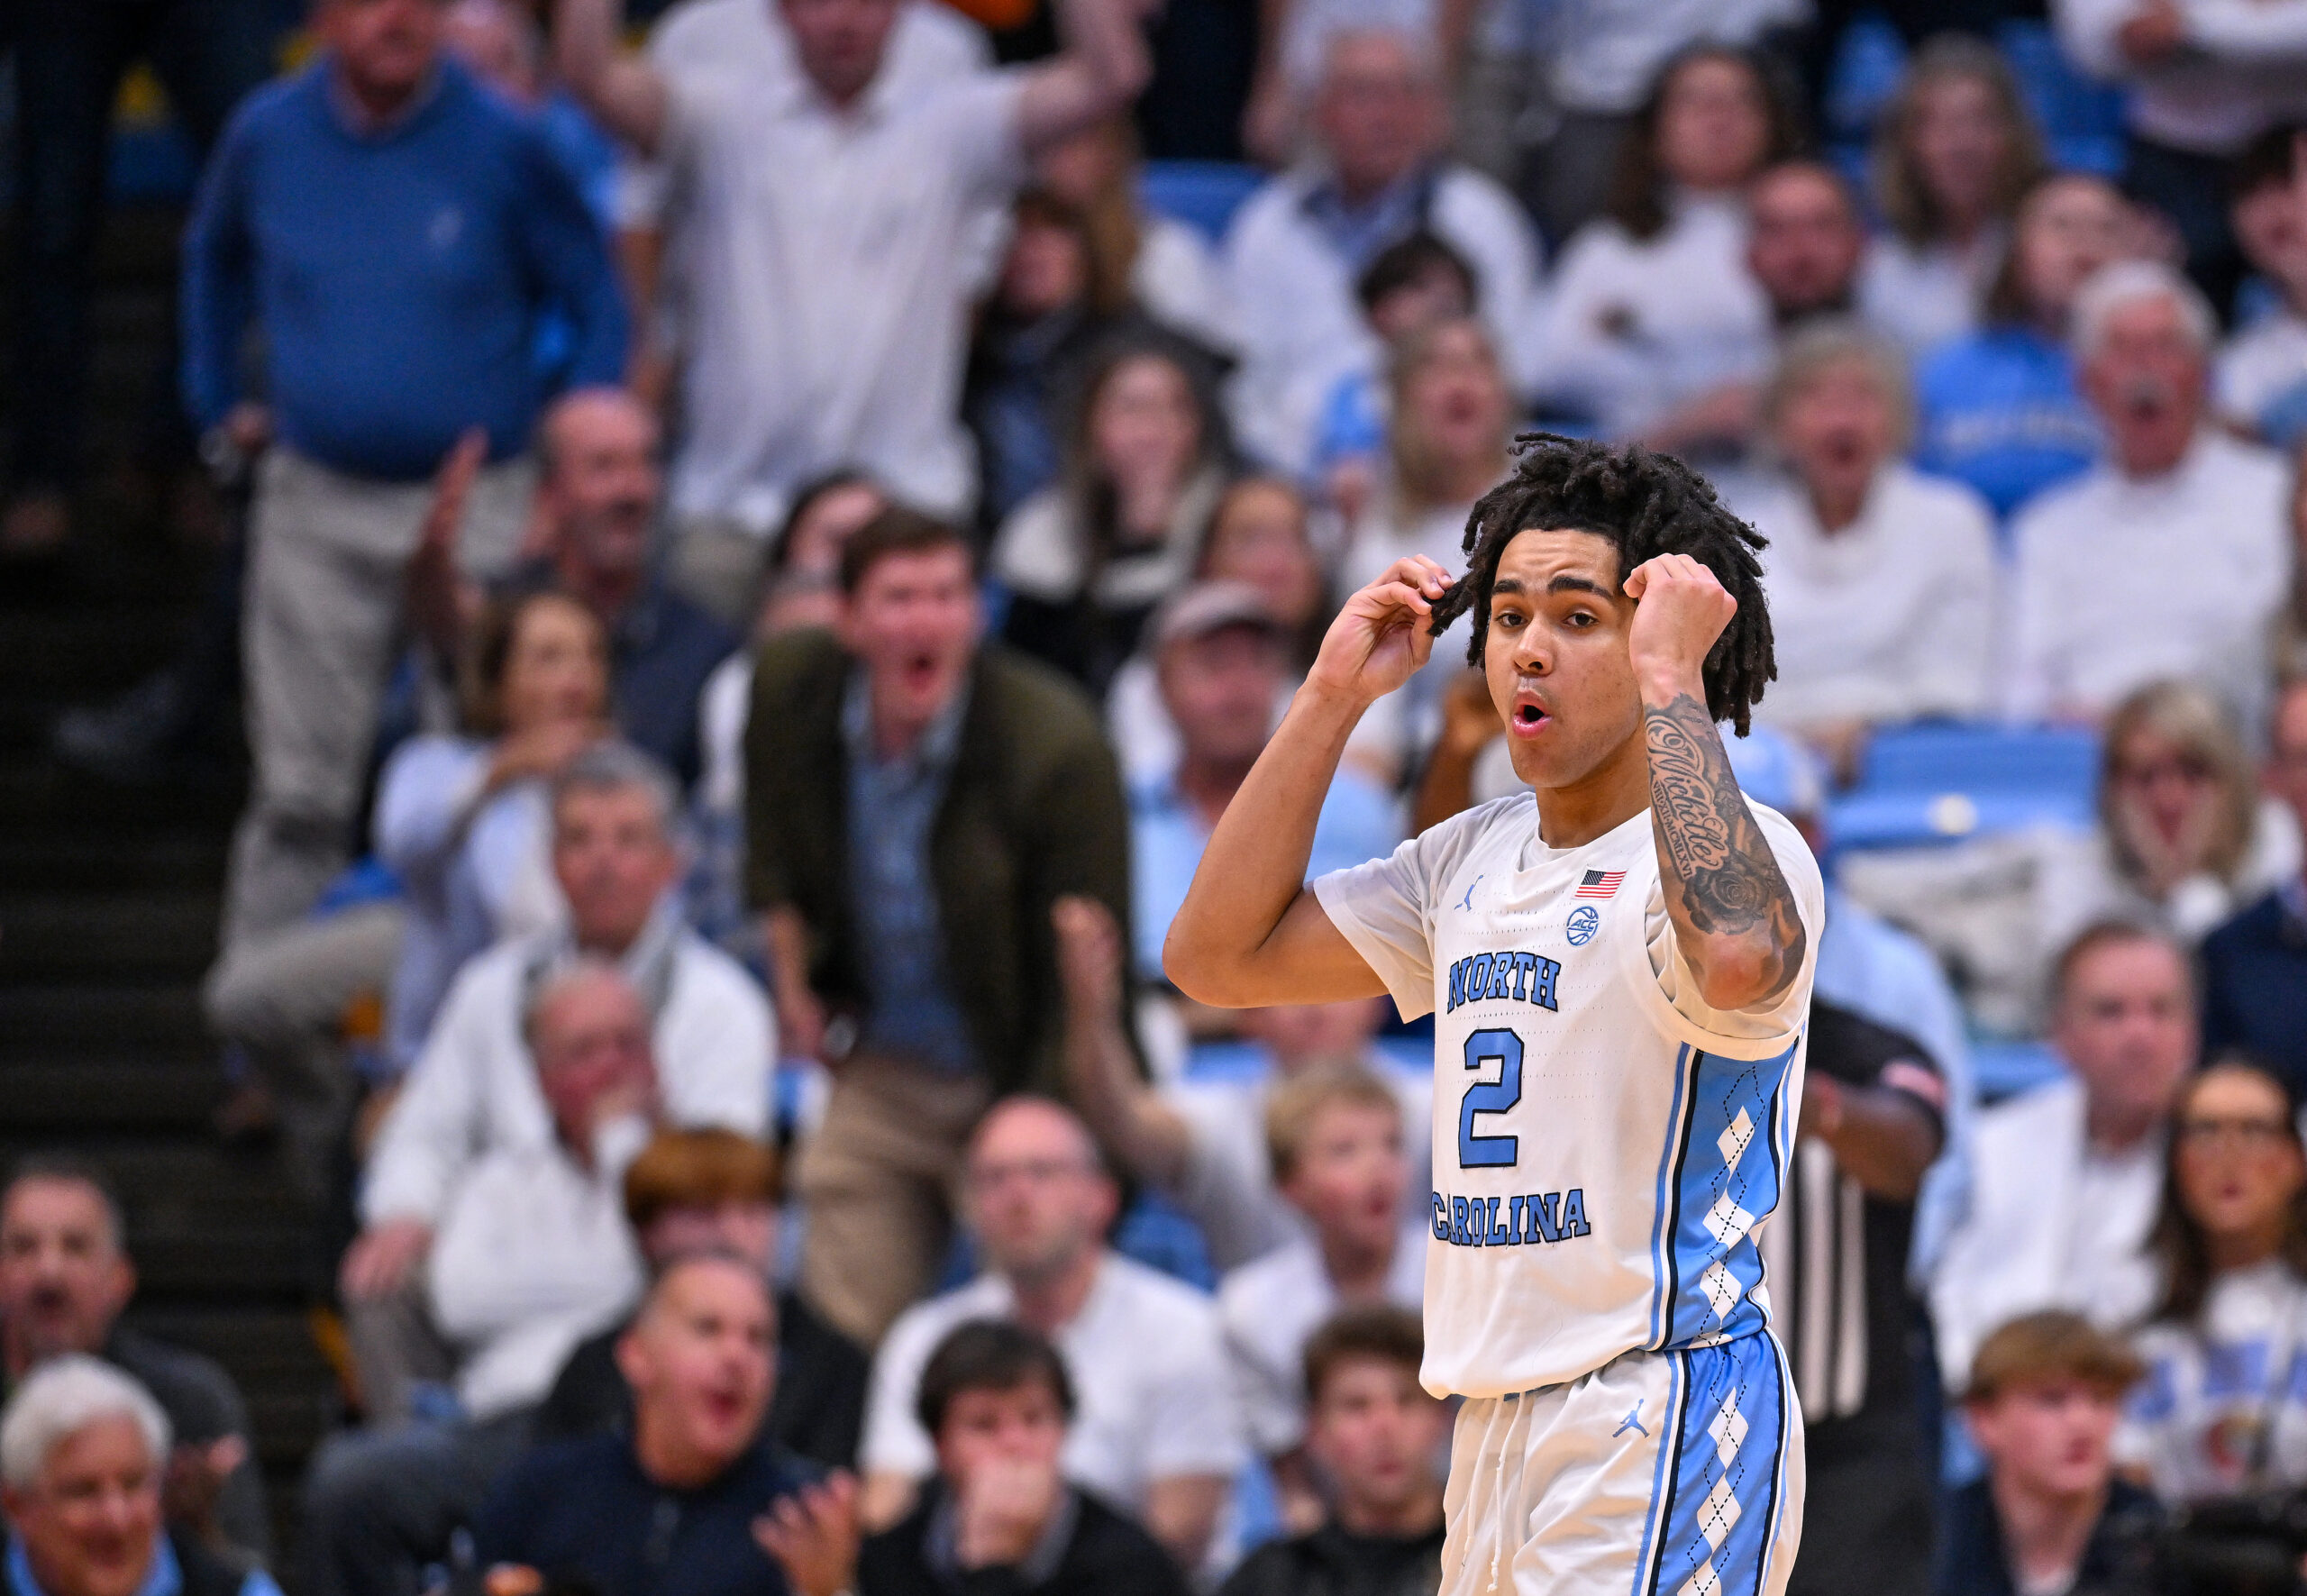 Elliot Cadeau finds way to make impact in UNC basketball’s win over Tennessee